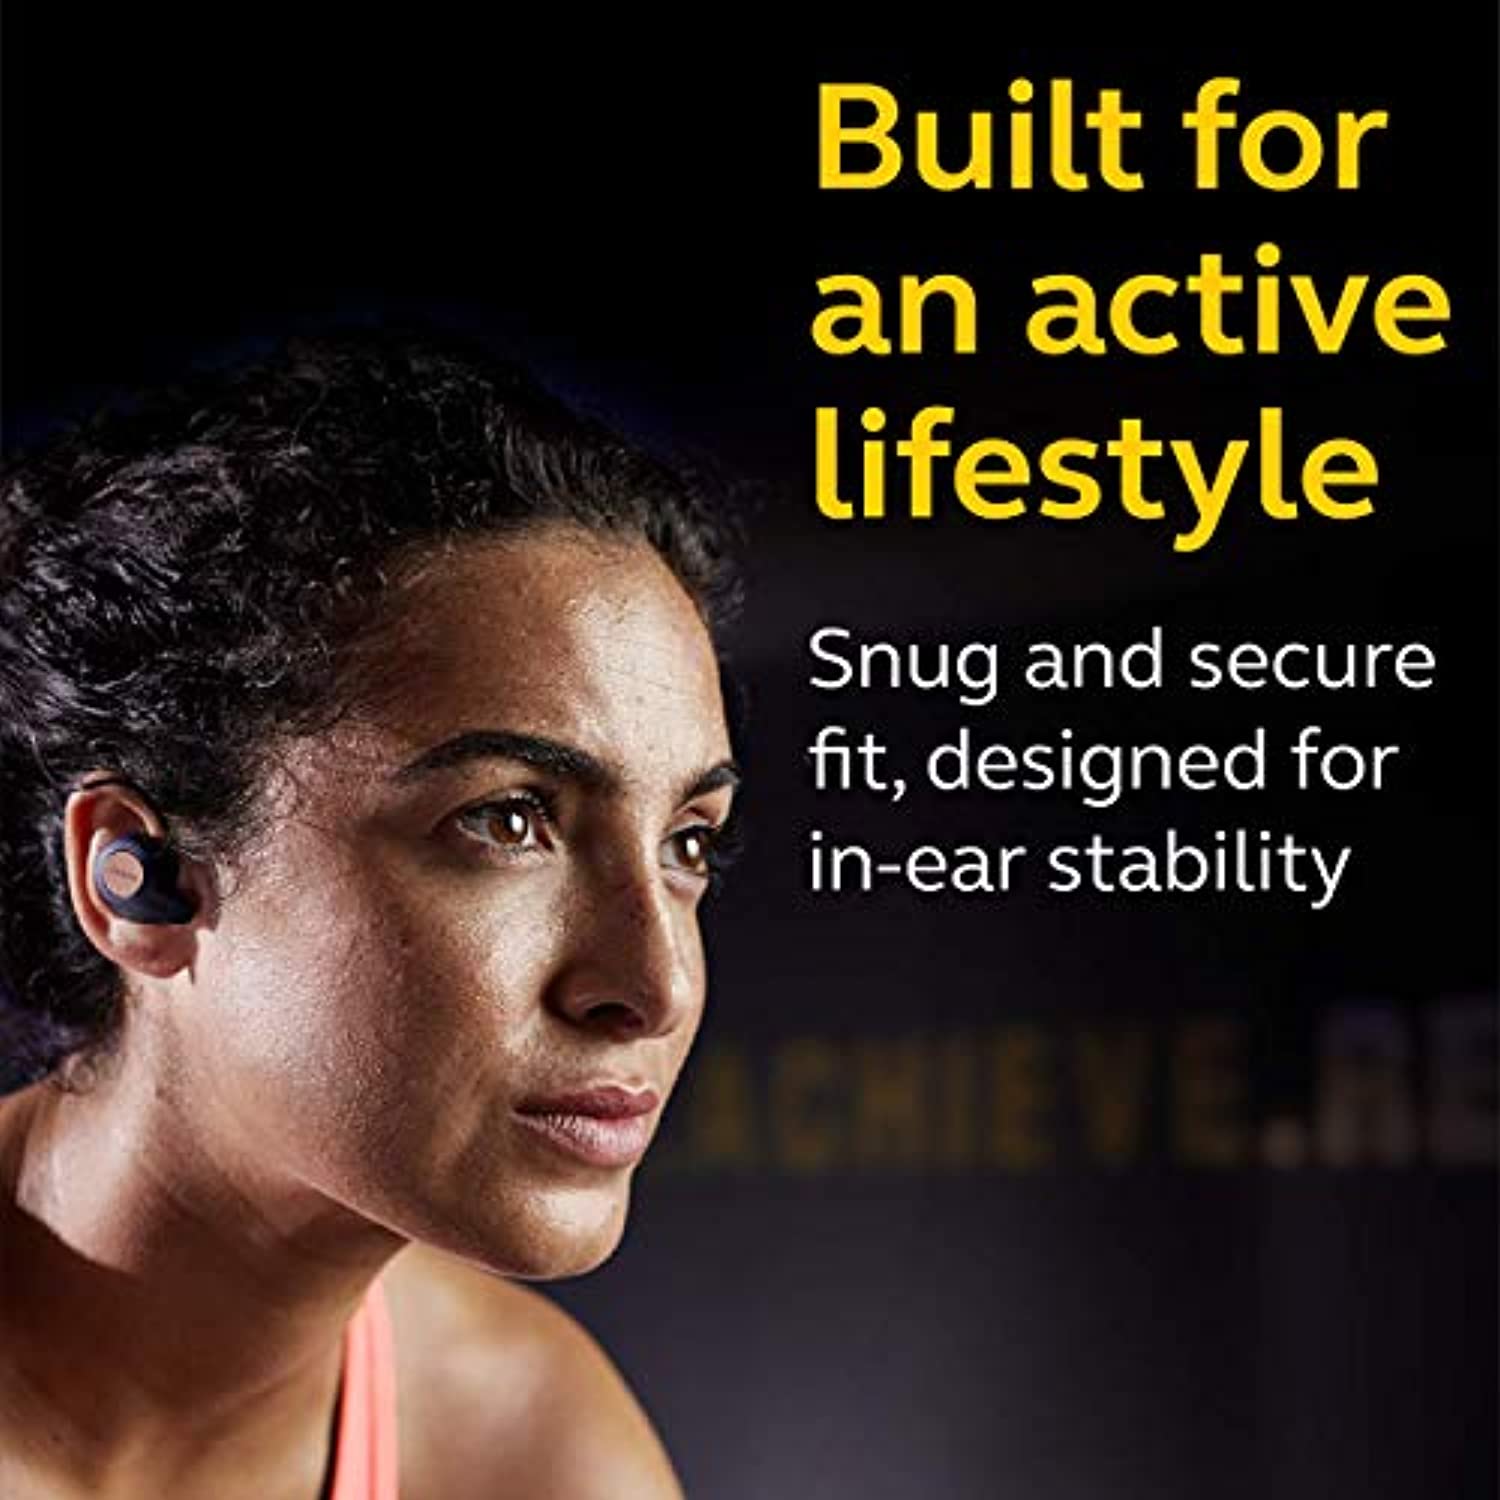 Jabra - 100-99010000-02 Elite Active 65t Earbuds True Wireless Earbuds with Charging Case Bluetooth Earbuds with a Secure Fit and Superior Sound, Long Battery Life and More - Copper Blue